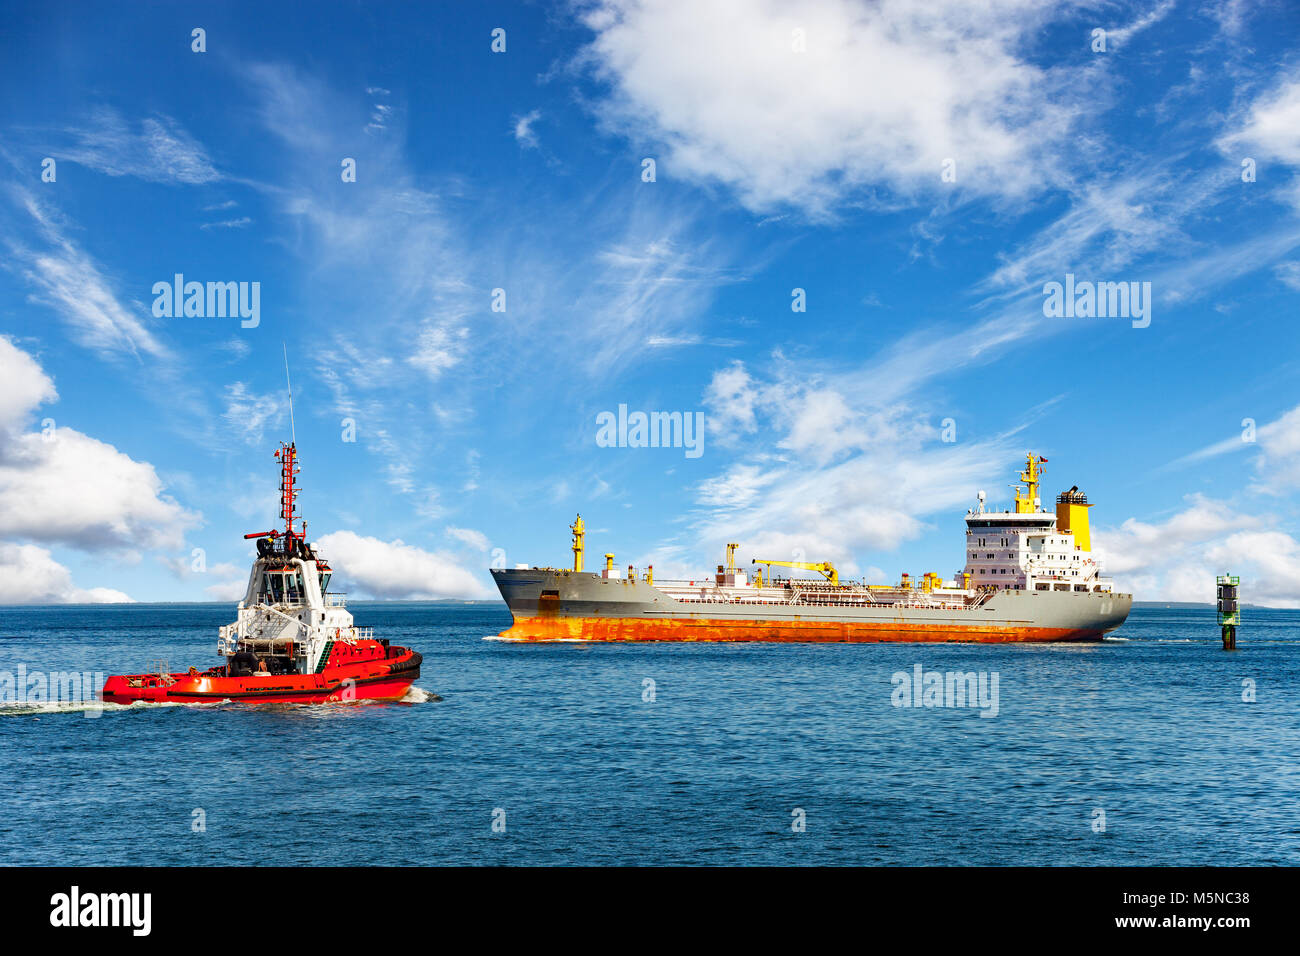 Red tug boat approaching to assist tanker. Stock Photo